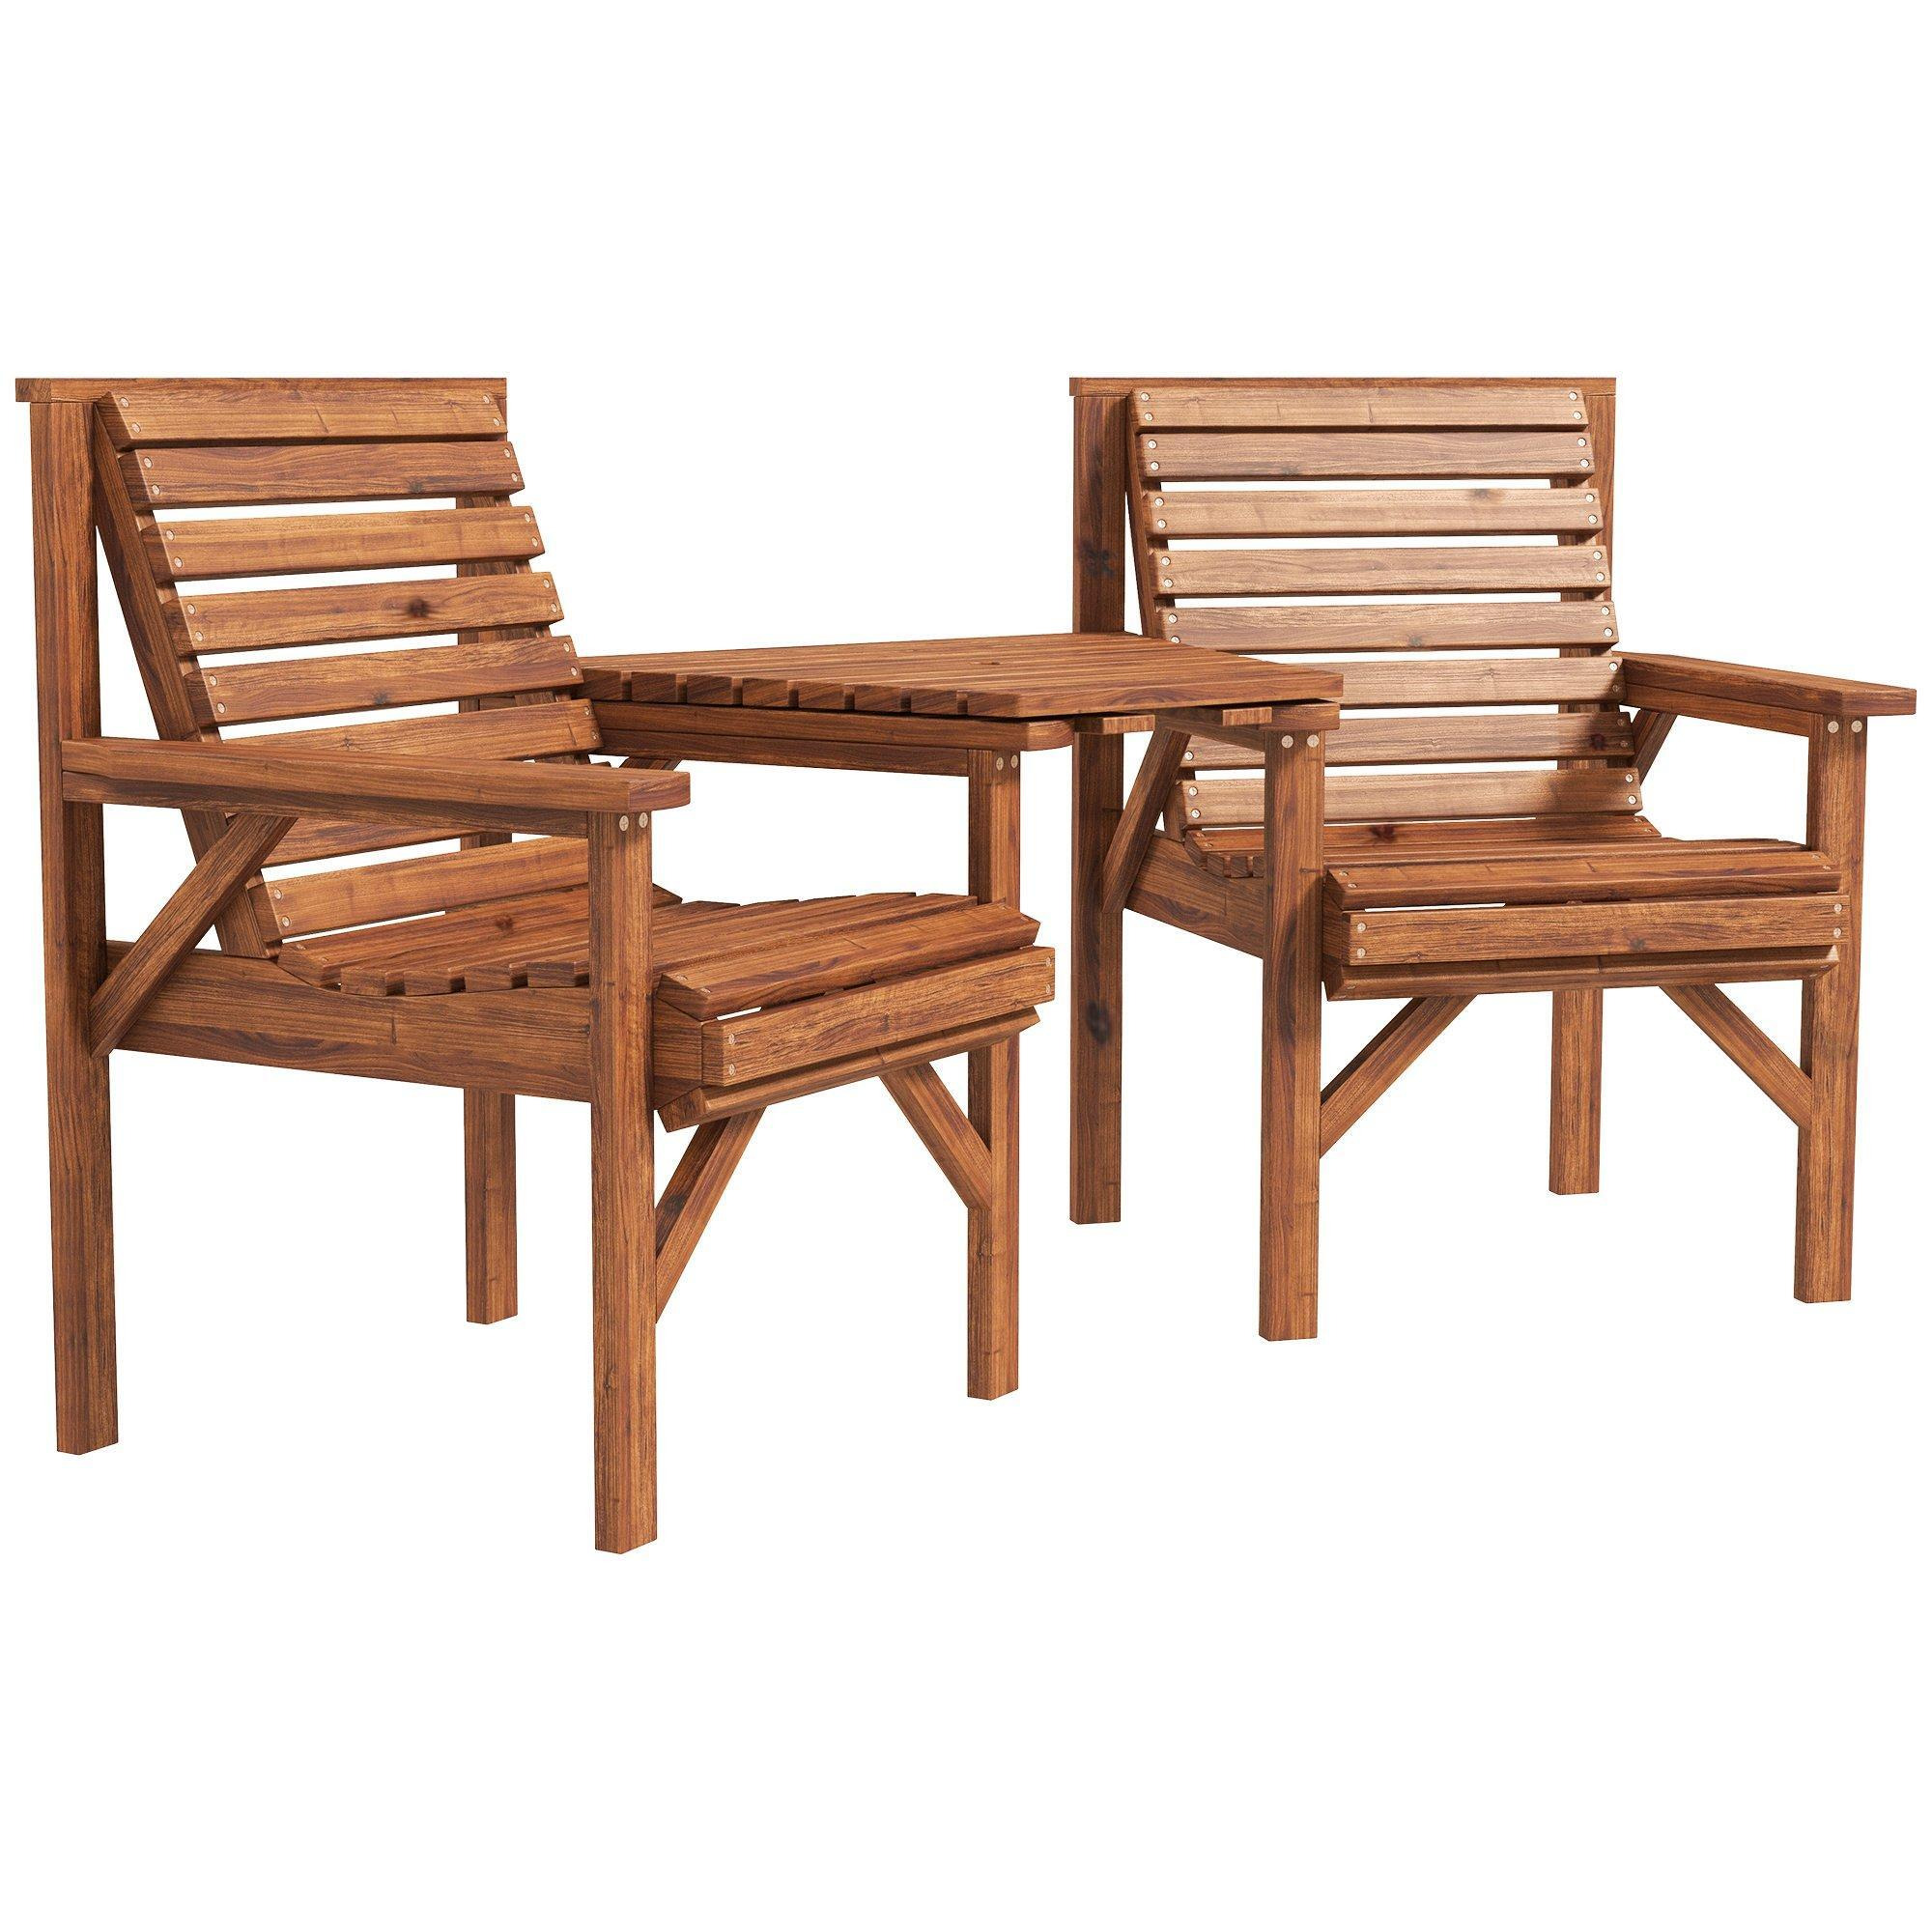 Wooden Garden Love Seat with Coffee Table Partner Bench - image 1